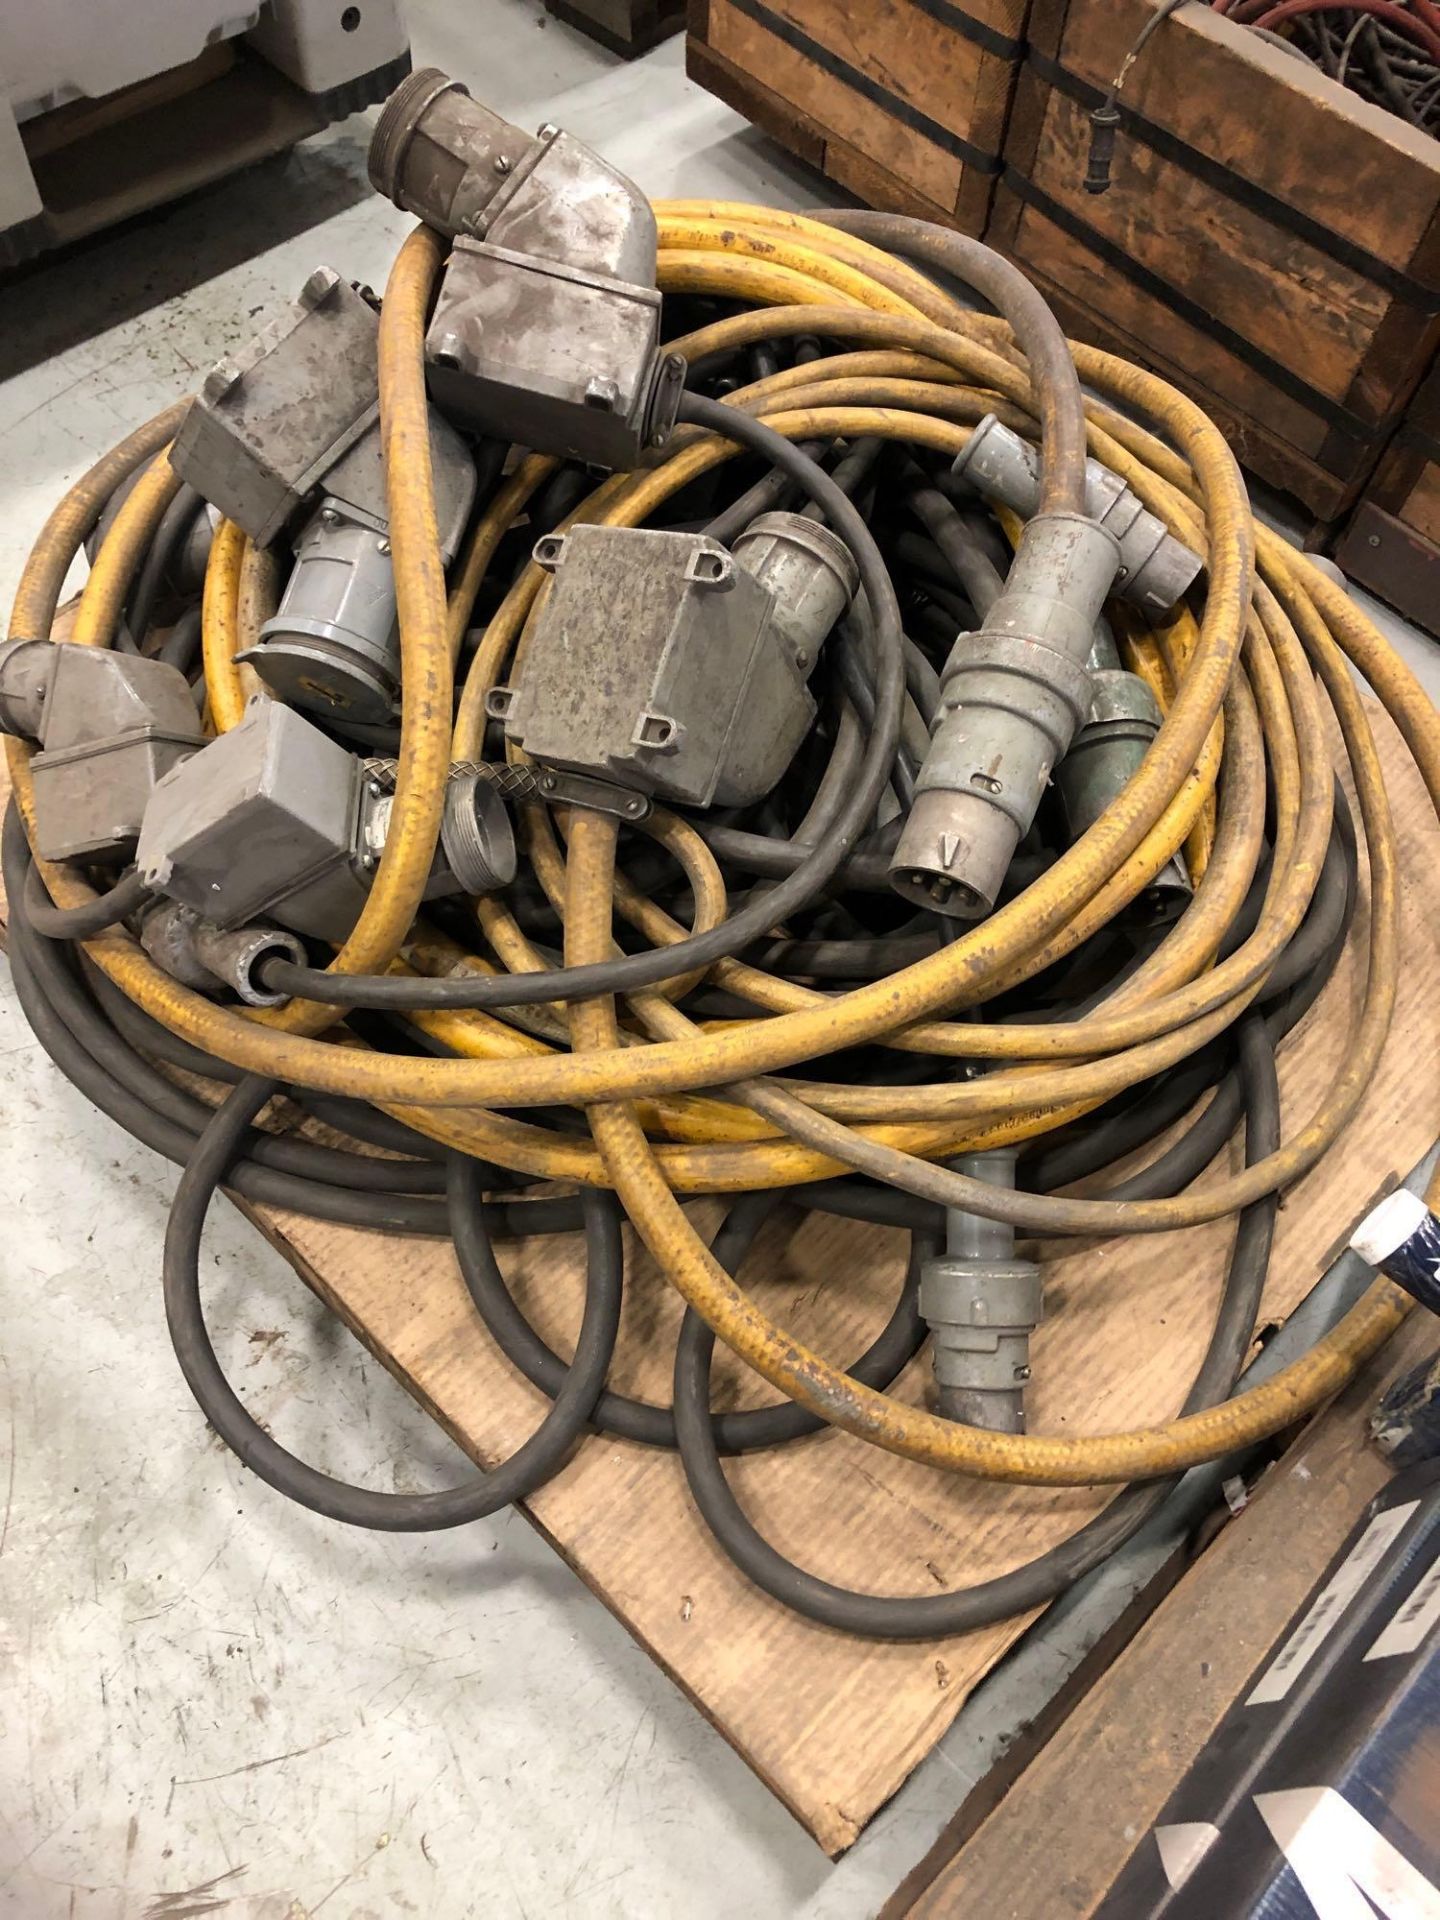 Lot of Electrical Cables w/ Connectors, Some Male & Female Connectors - Image 3 of 3